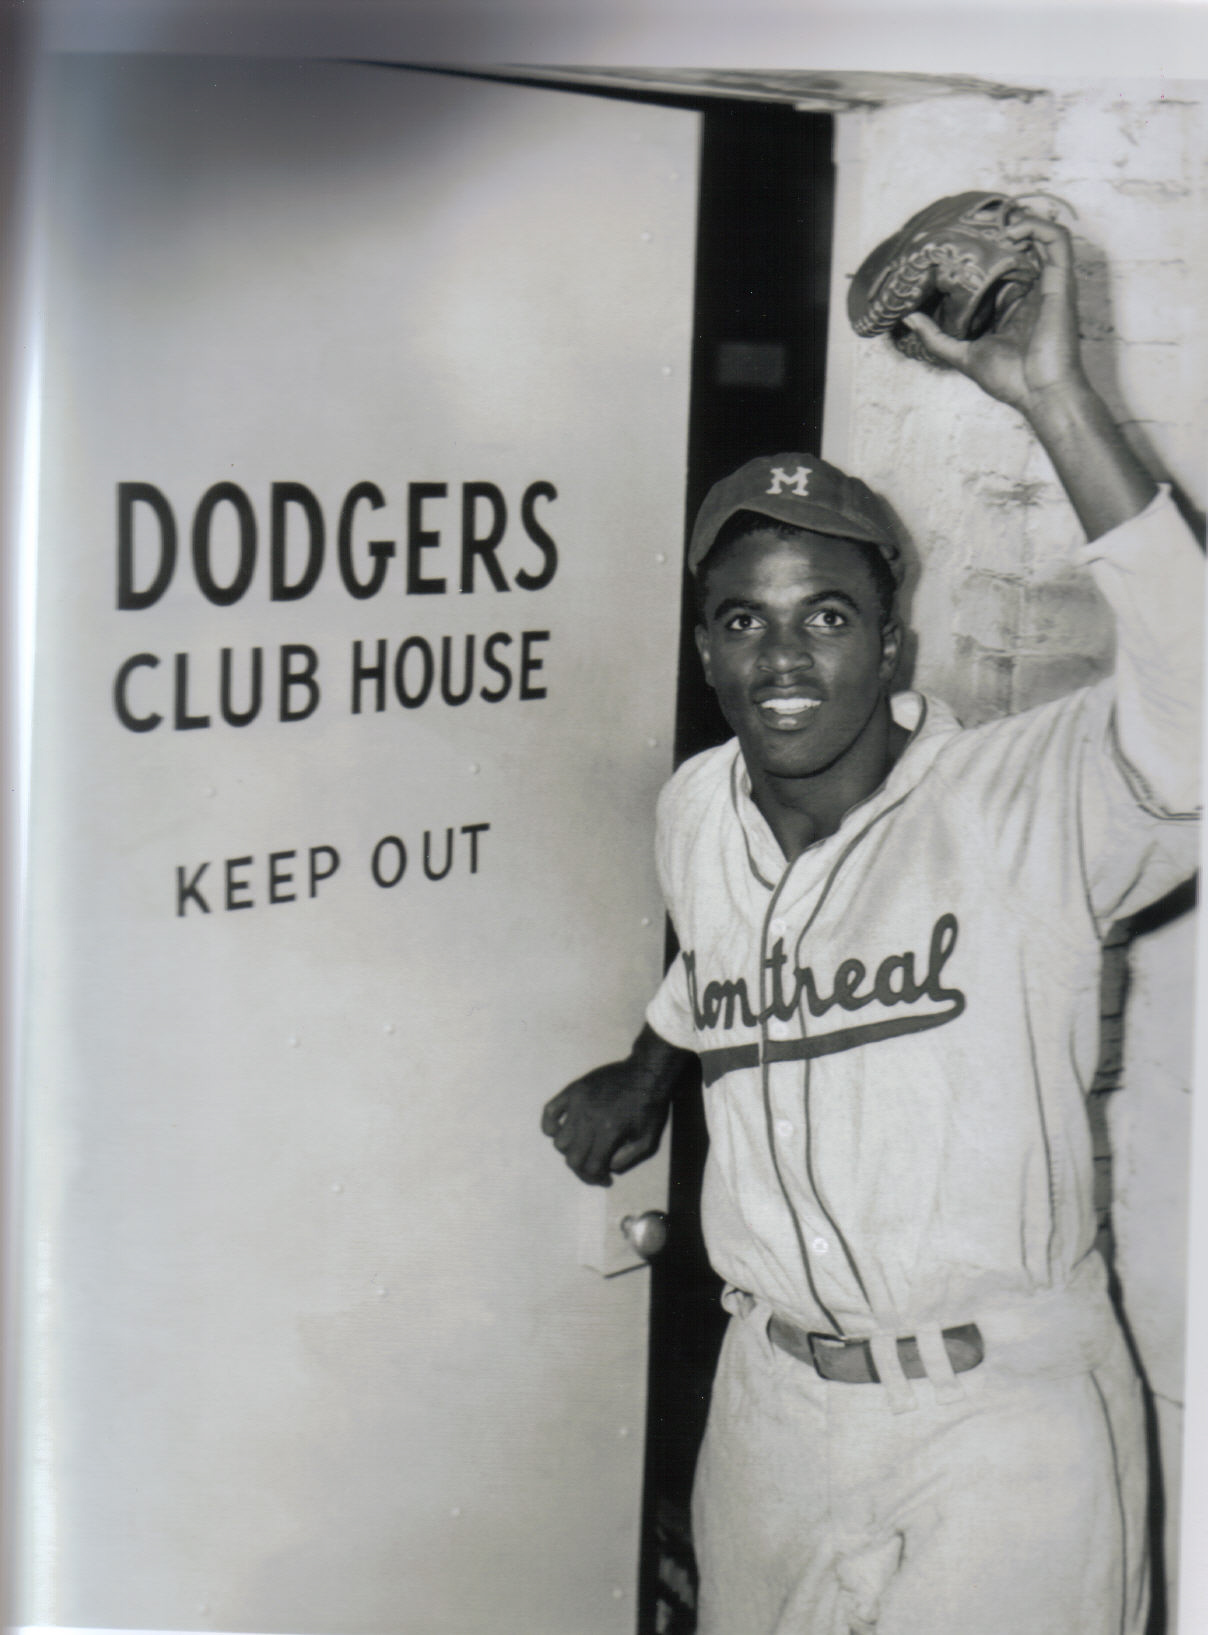 Majors celebrate 75th anniversary of Jackie Robinson's debut